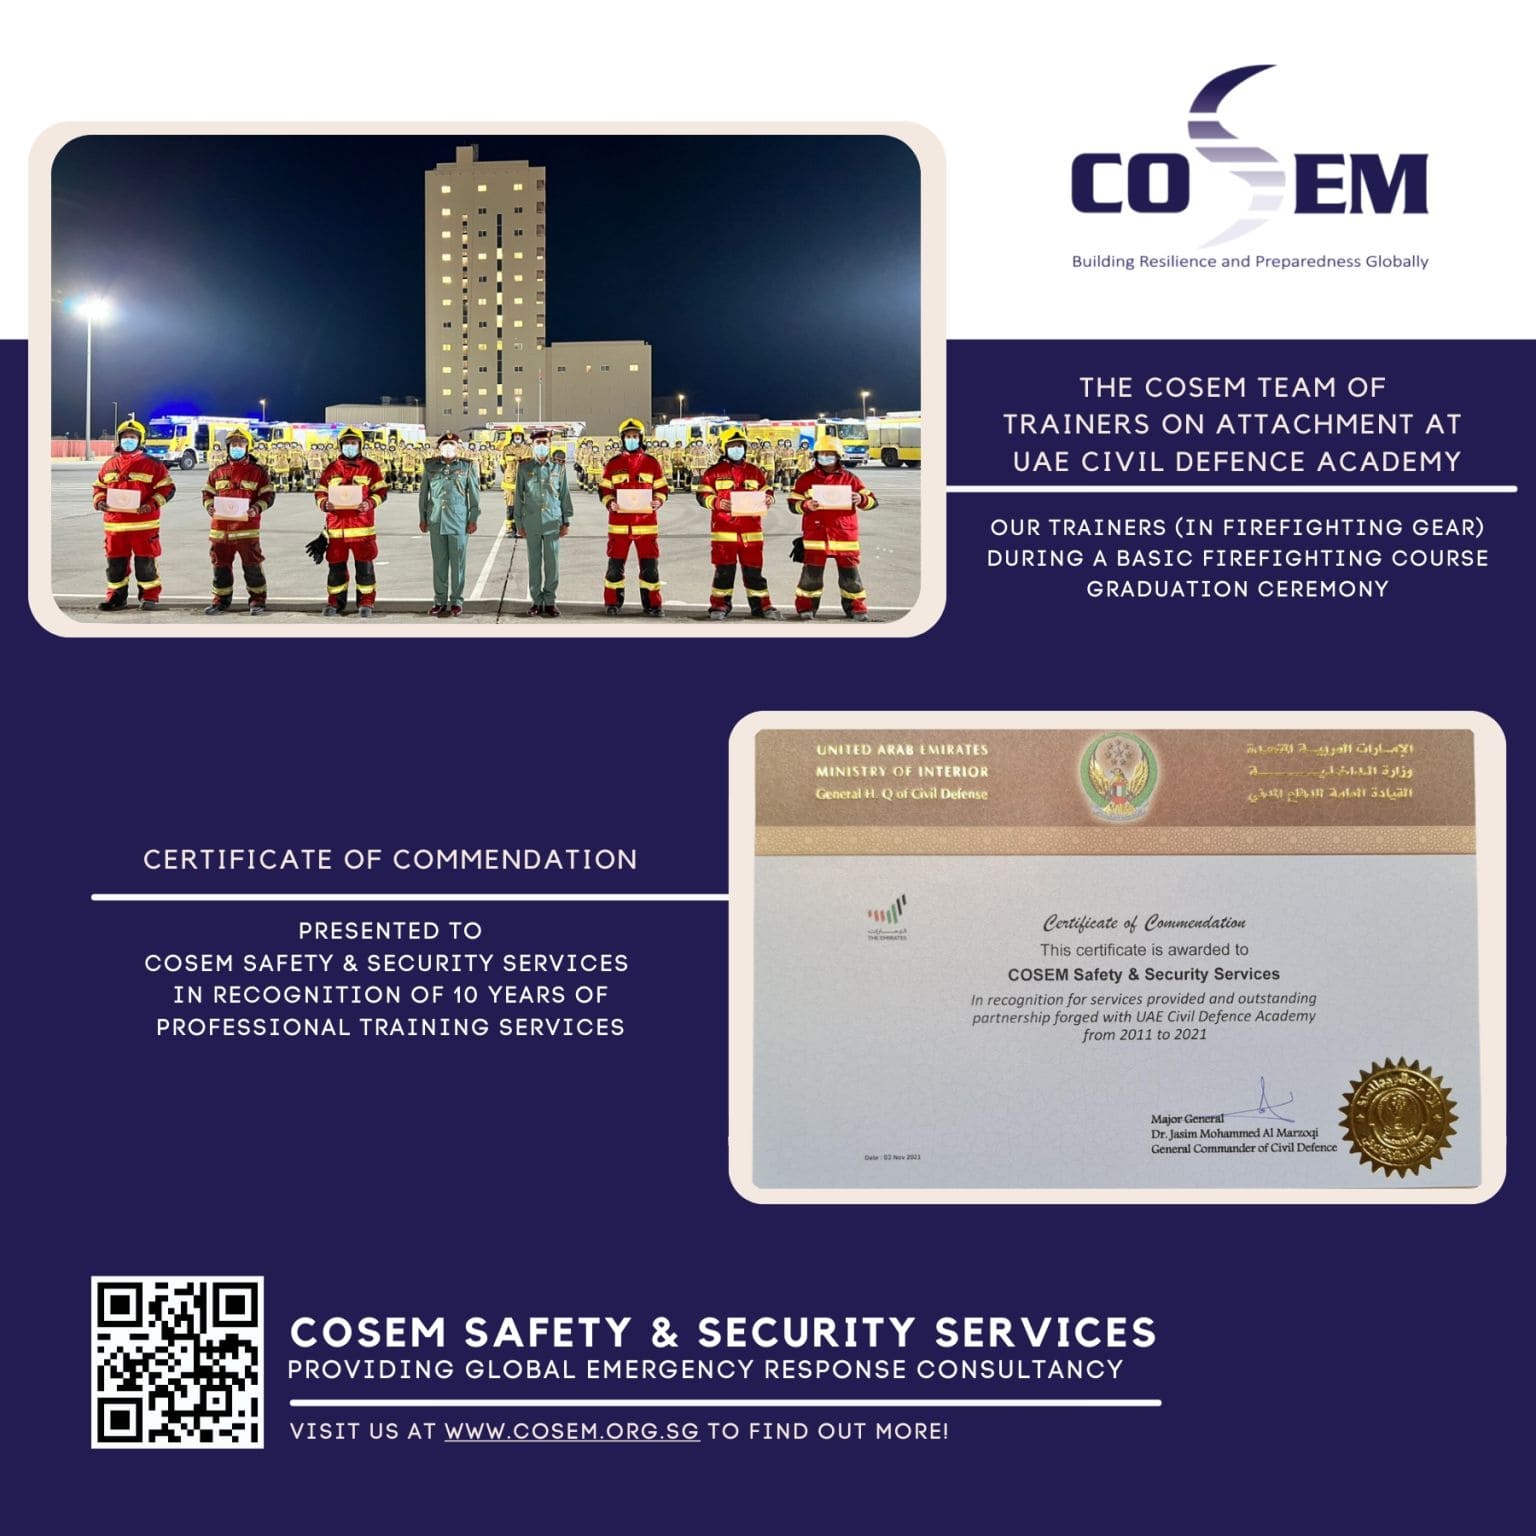 COSEM Safety & Security Services receives a Certificate of Commendation from UAE Civil Defence